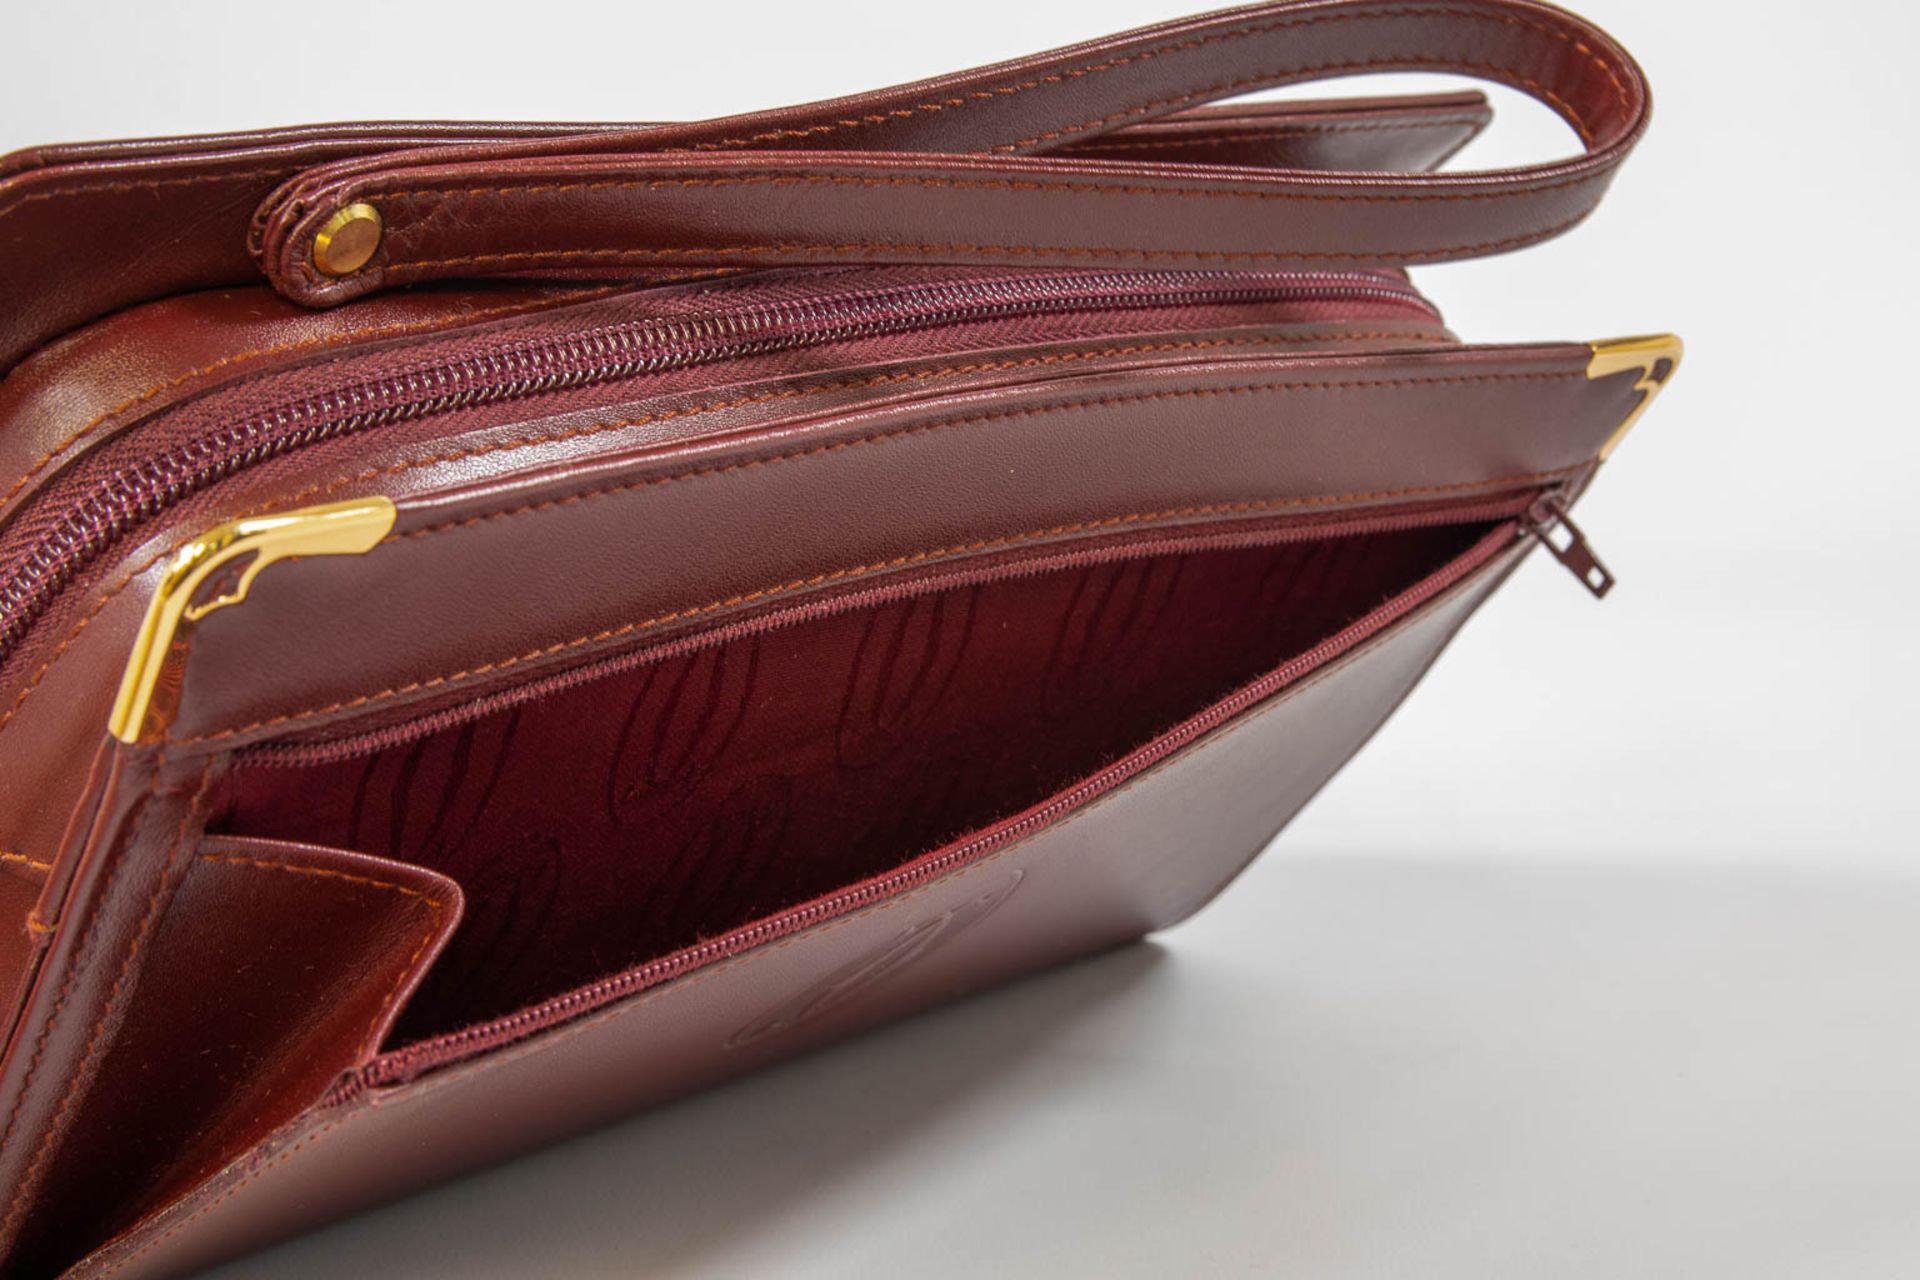 A Must De Cartier brown leather purse or handbag, New condition and in the original box. - Image 17 of 20